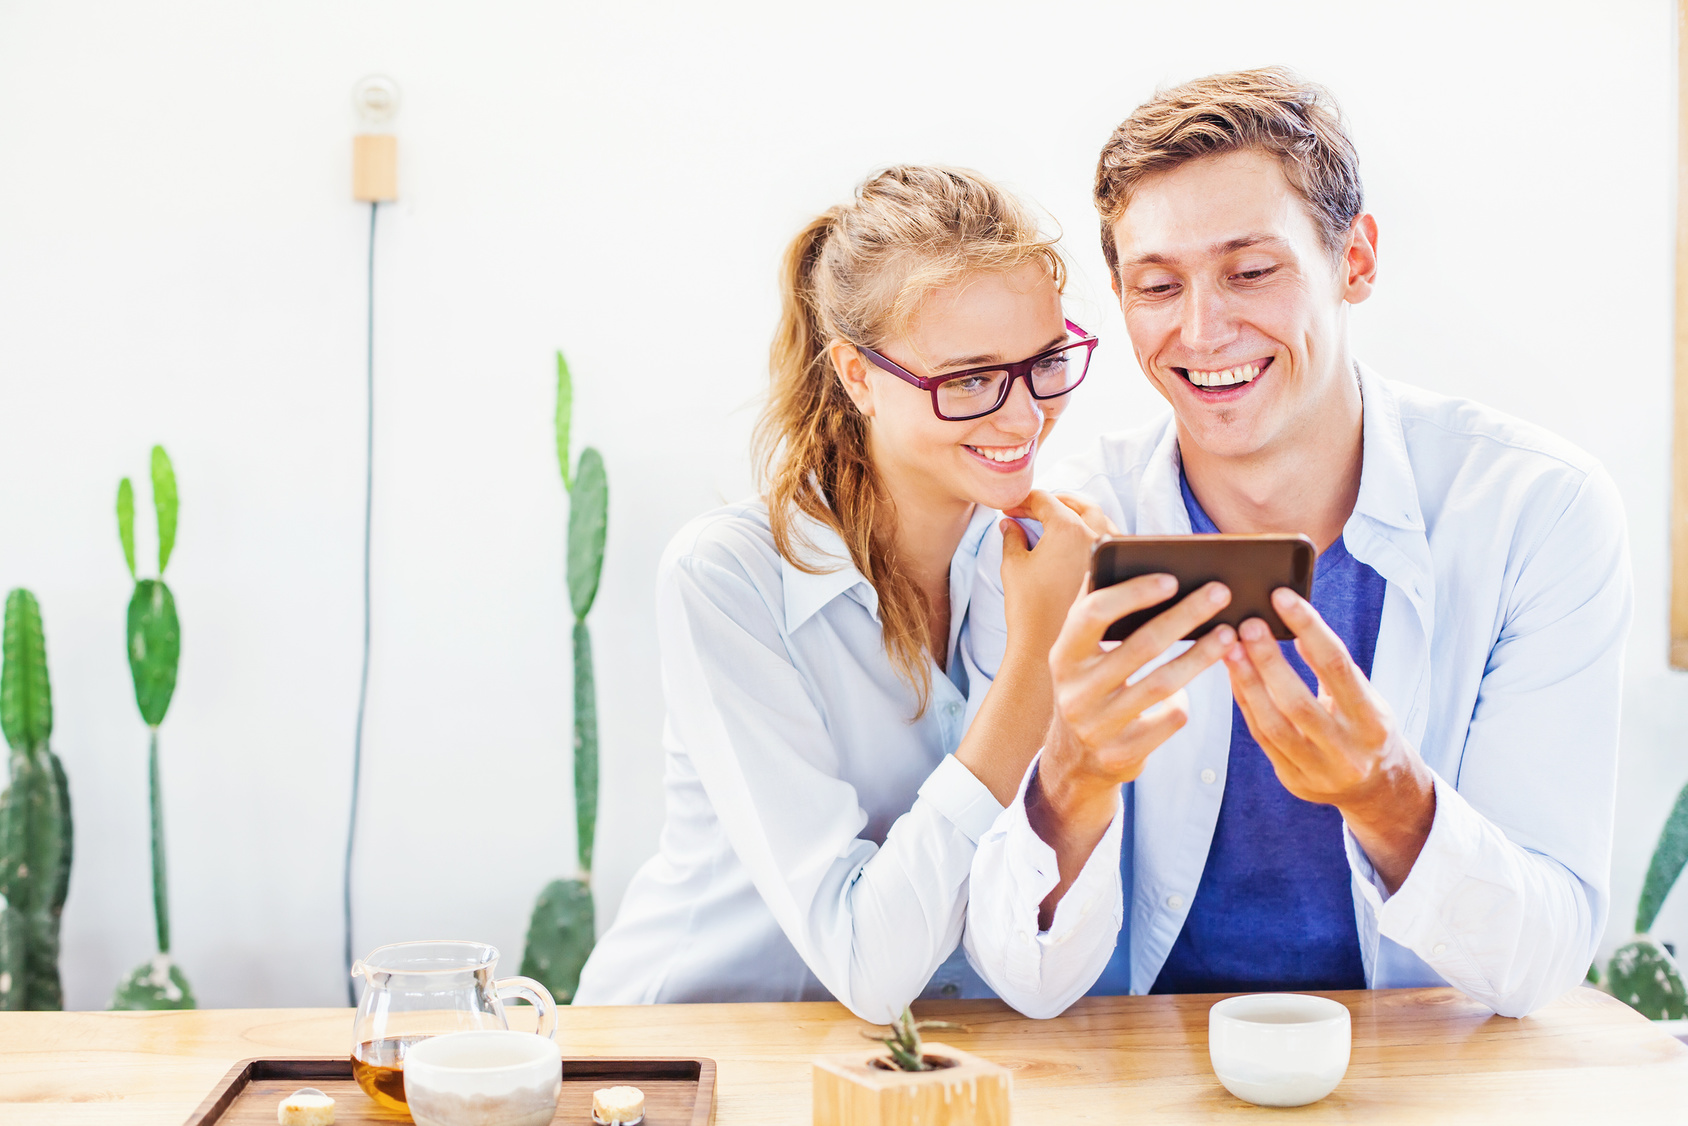 man and woman laughing over phone